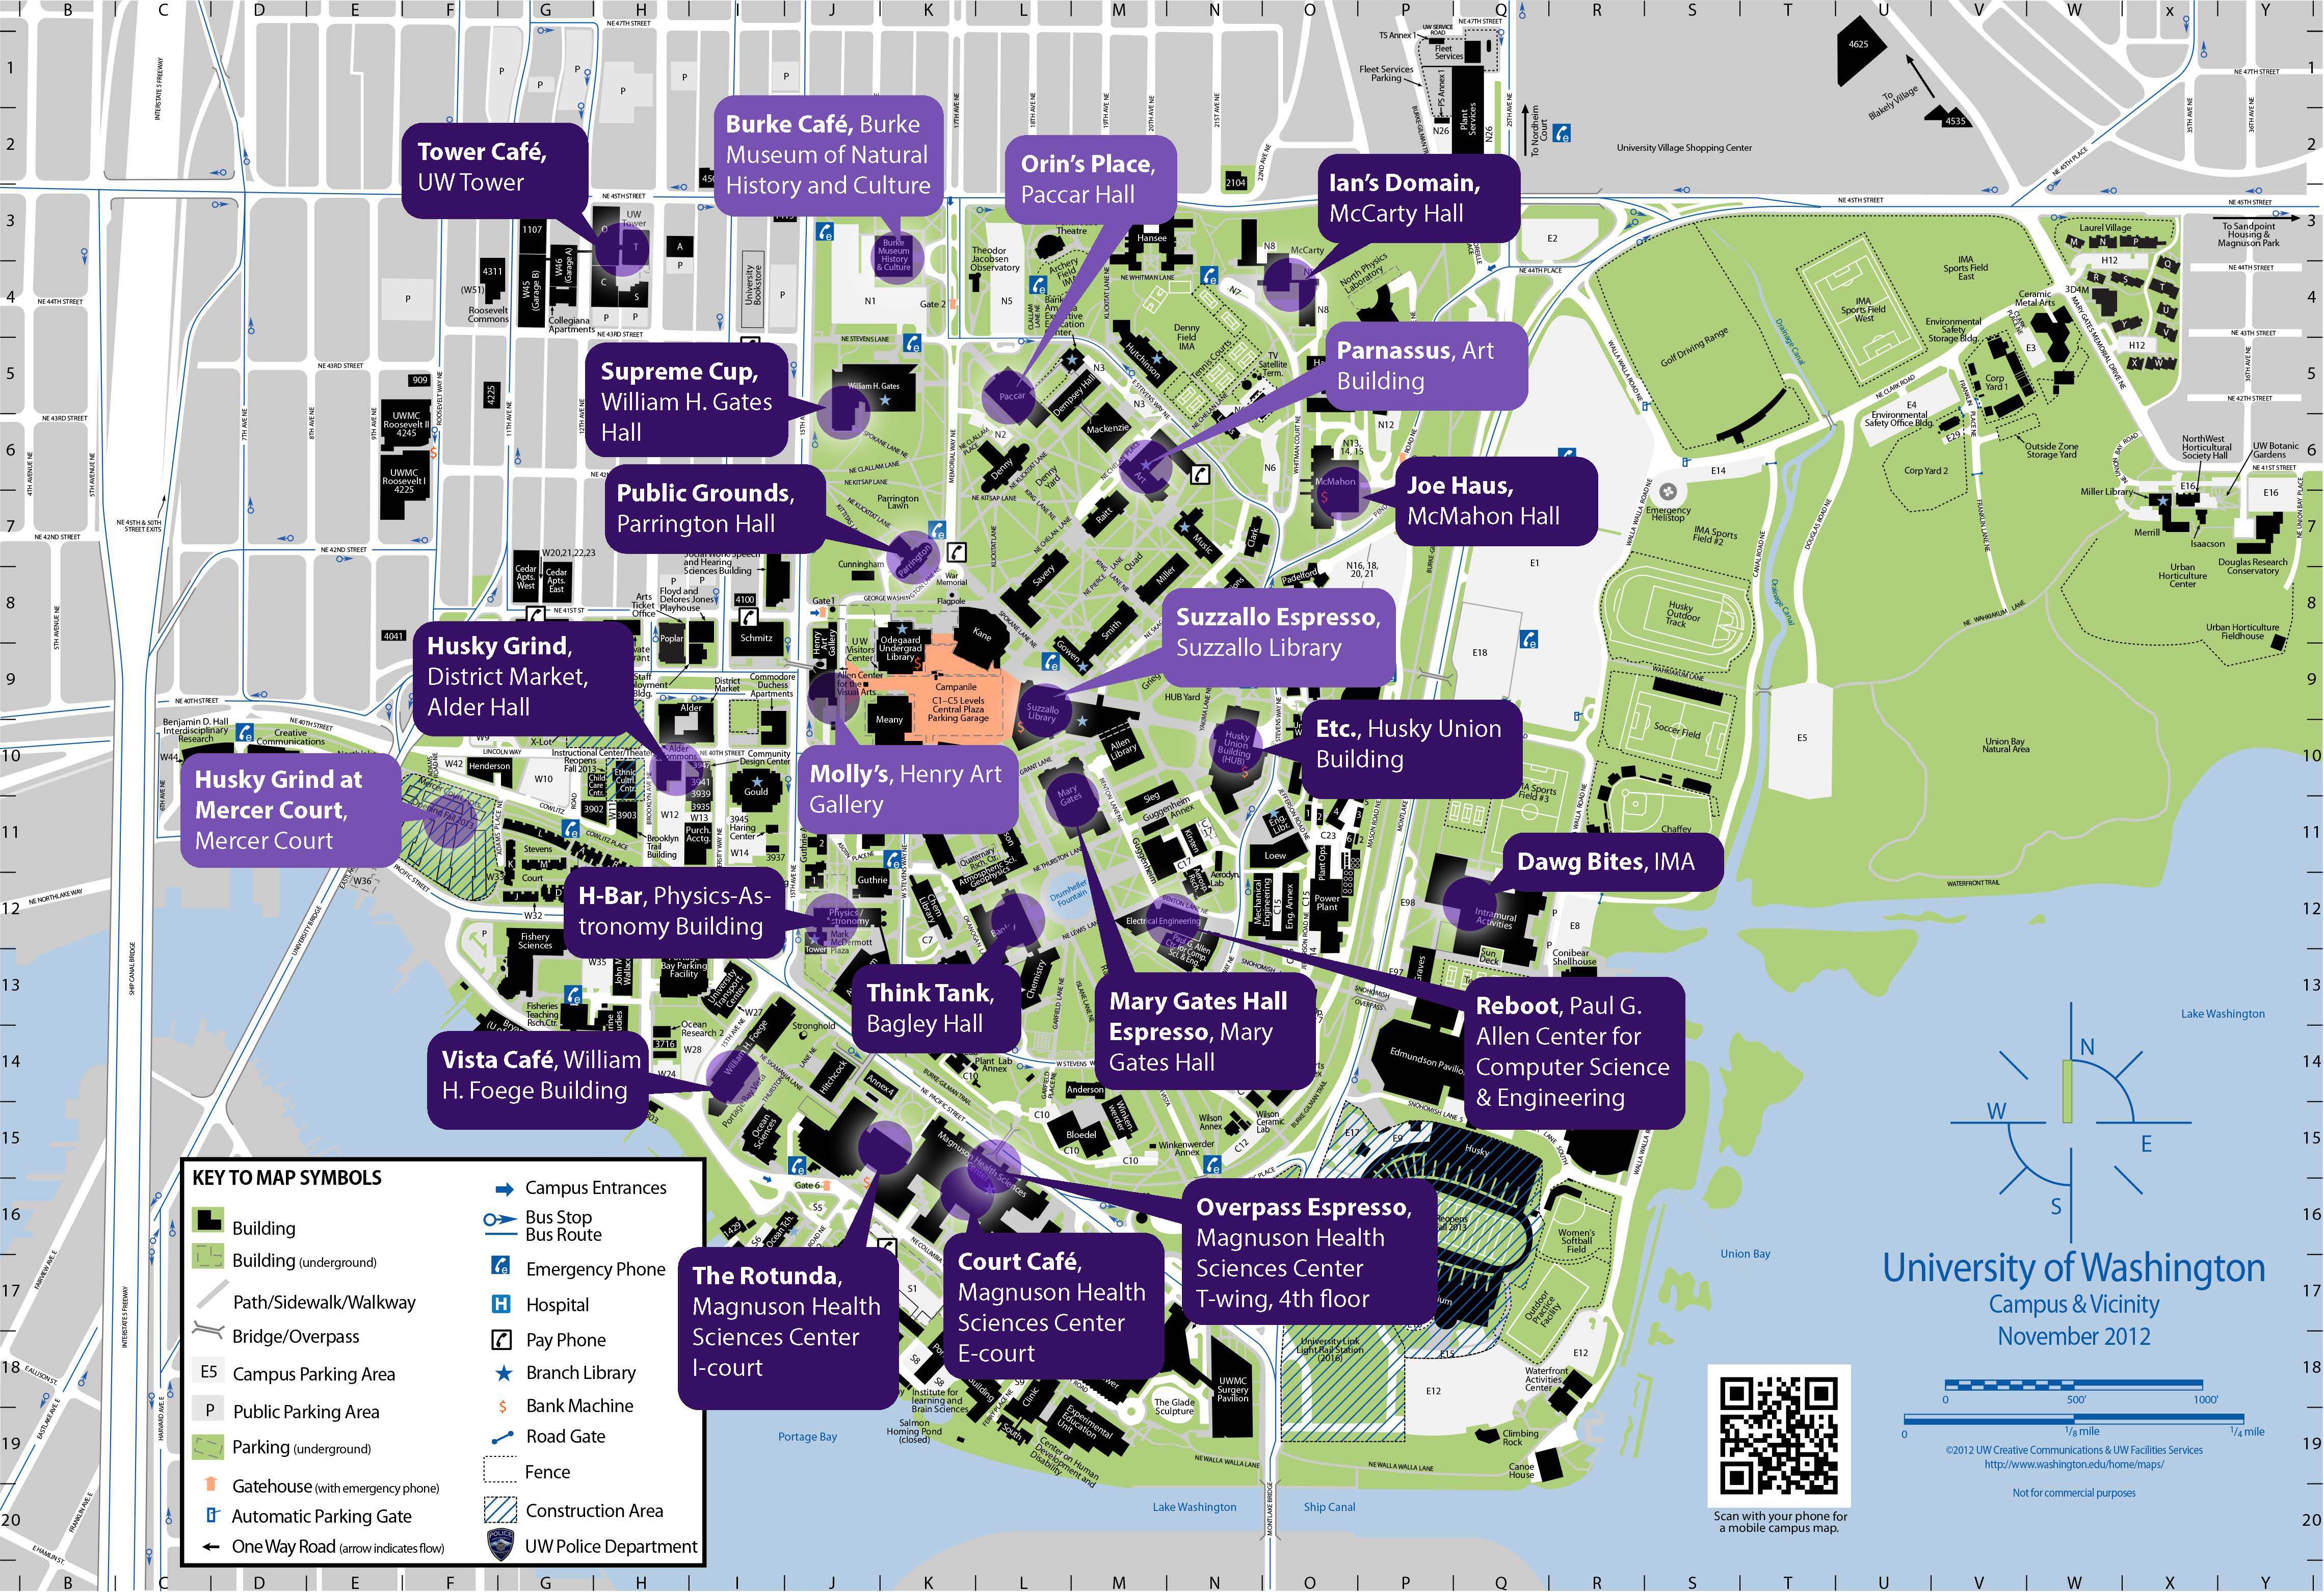 map of uw campus Campus Coffee Map Reviews The Whole U map of uw campus